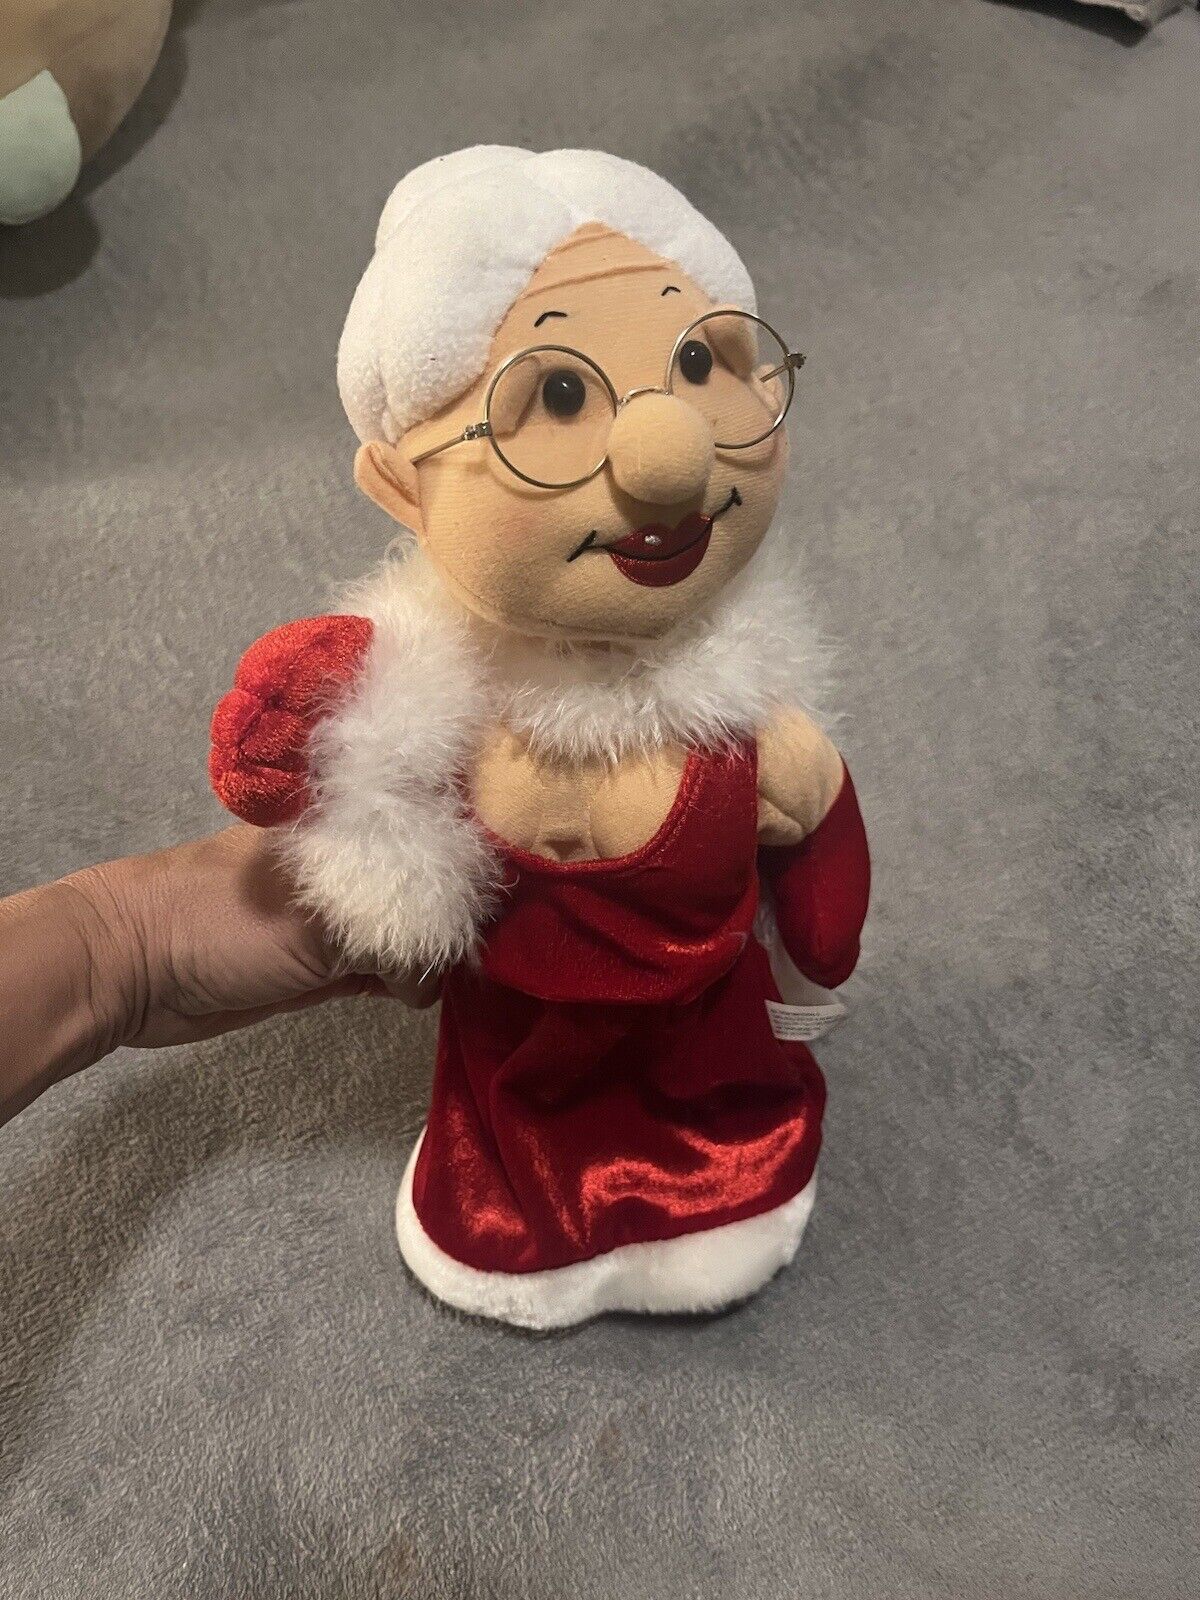 Sexy Mrs. Claus Dancing Singing Animated Plays “ Santa Baby” Tested And Works